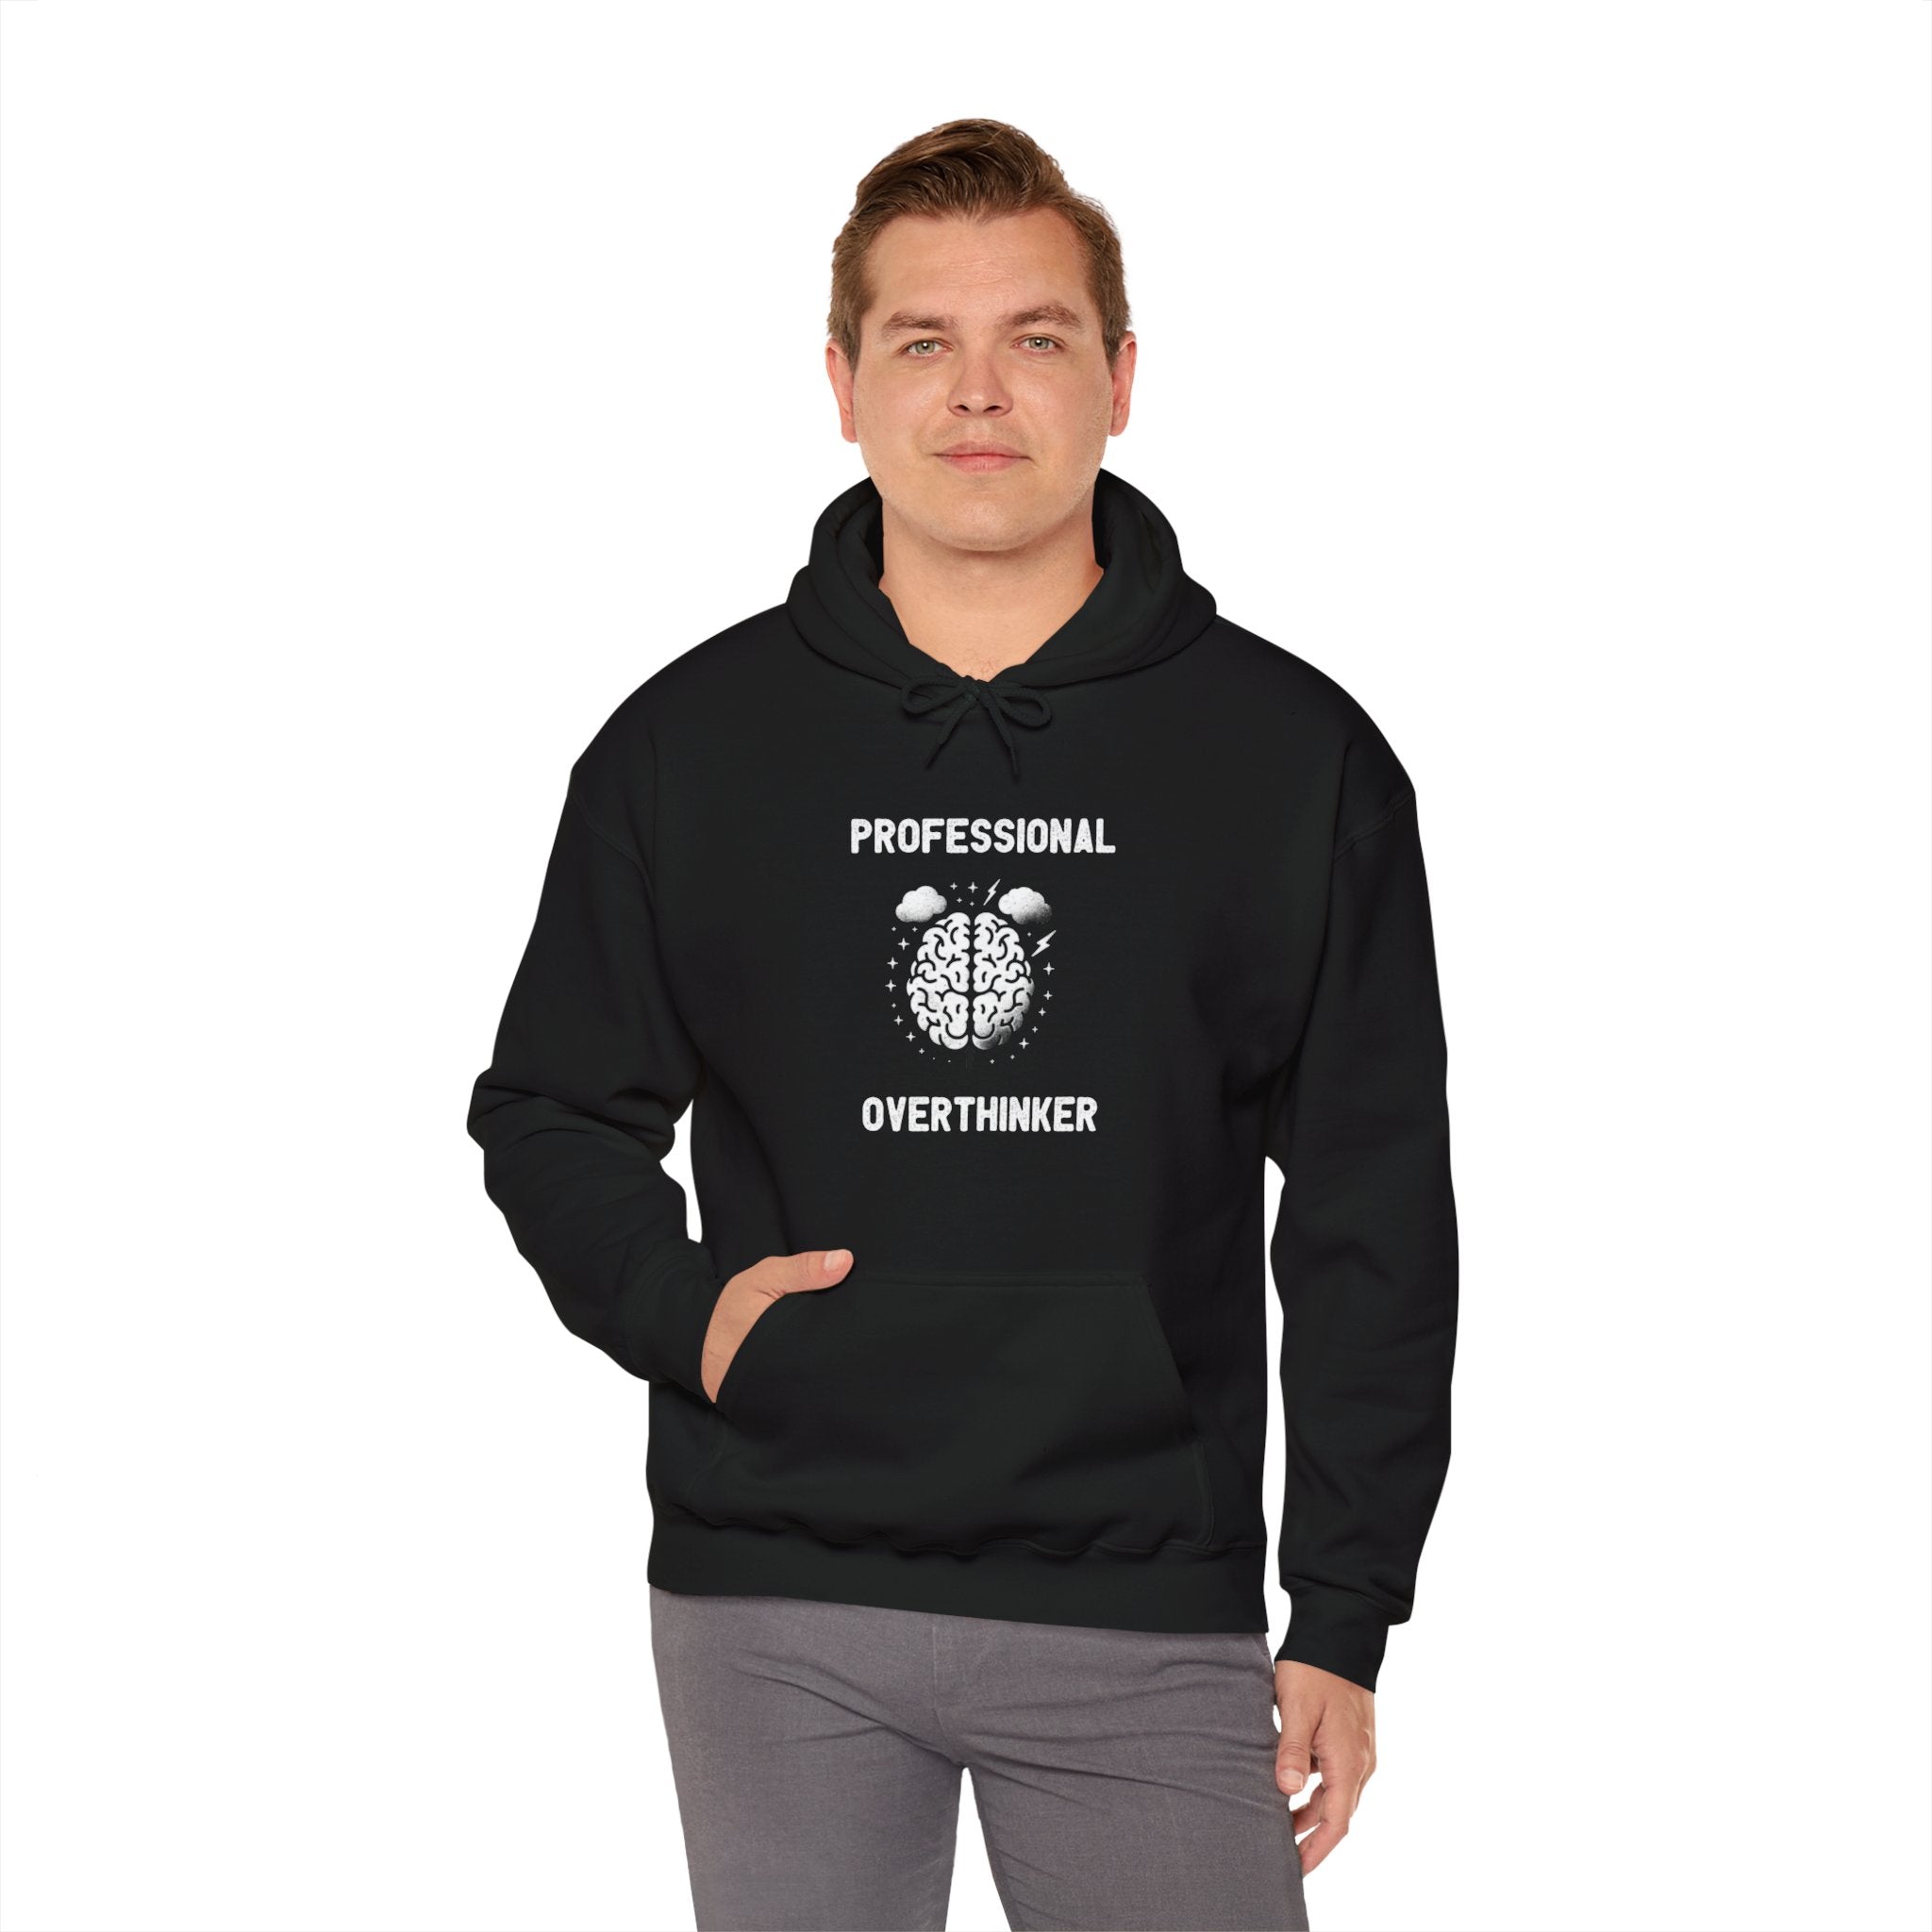 A person stands wearing a black Professional Overthinker - Hooded Sweatshirt that boasts the "Professional Overthinker" design with an illustration of a brain on the front, combining style and comfort.